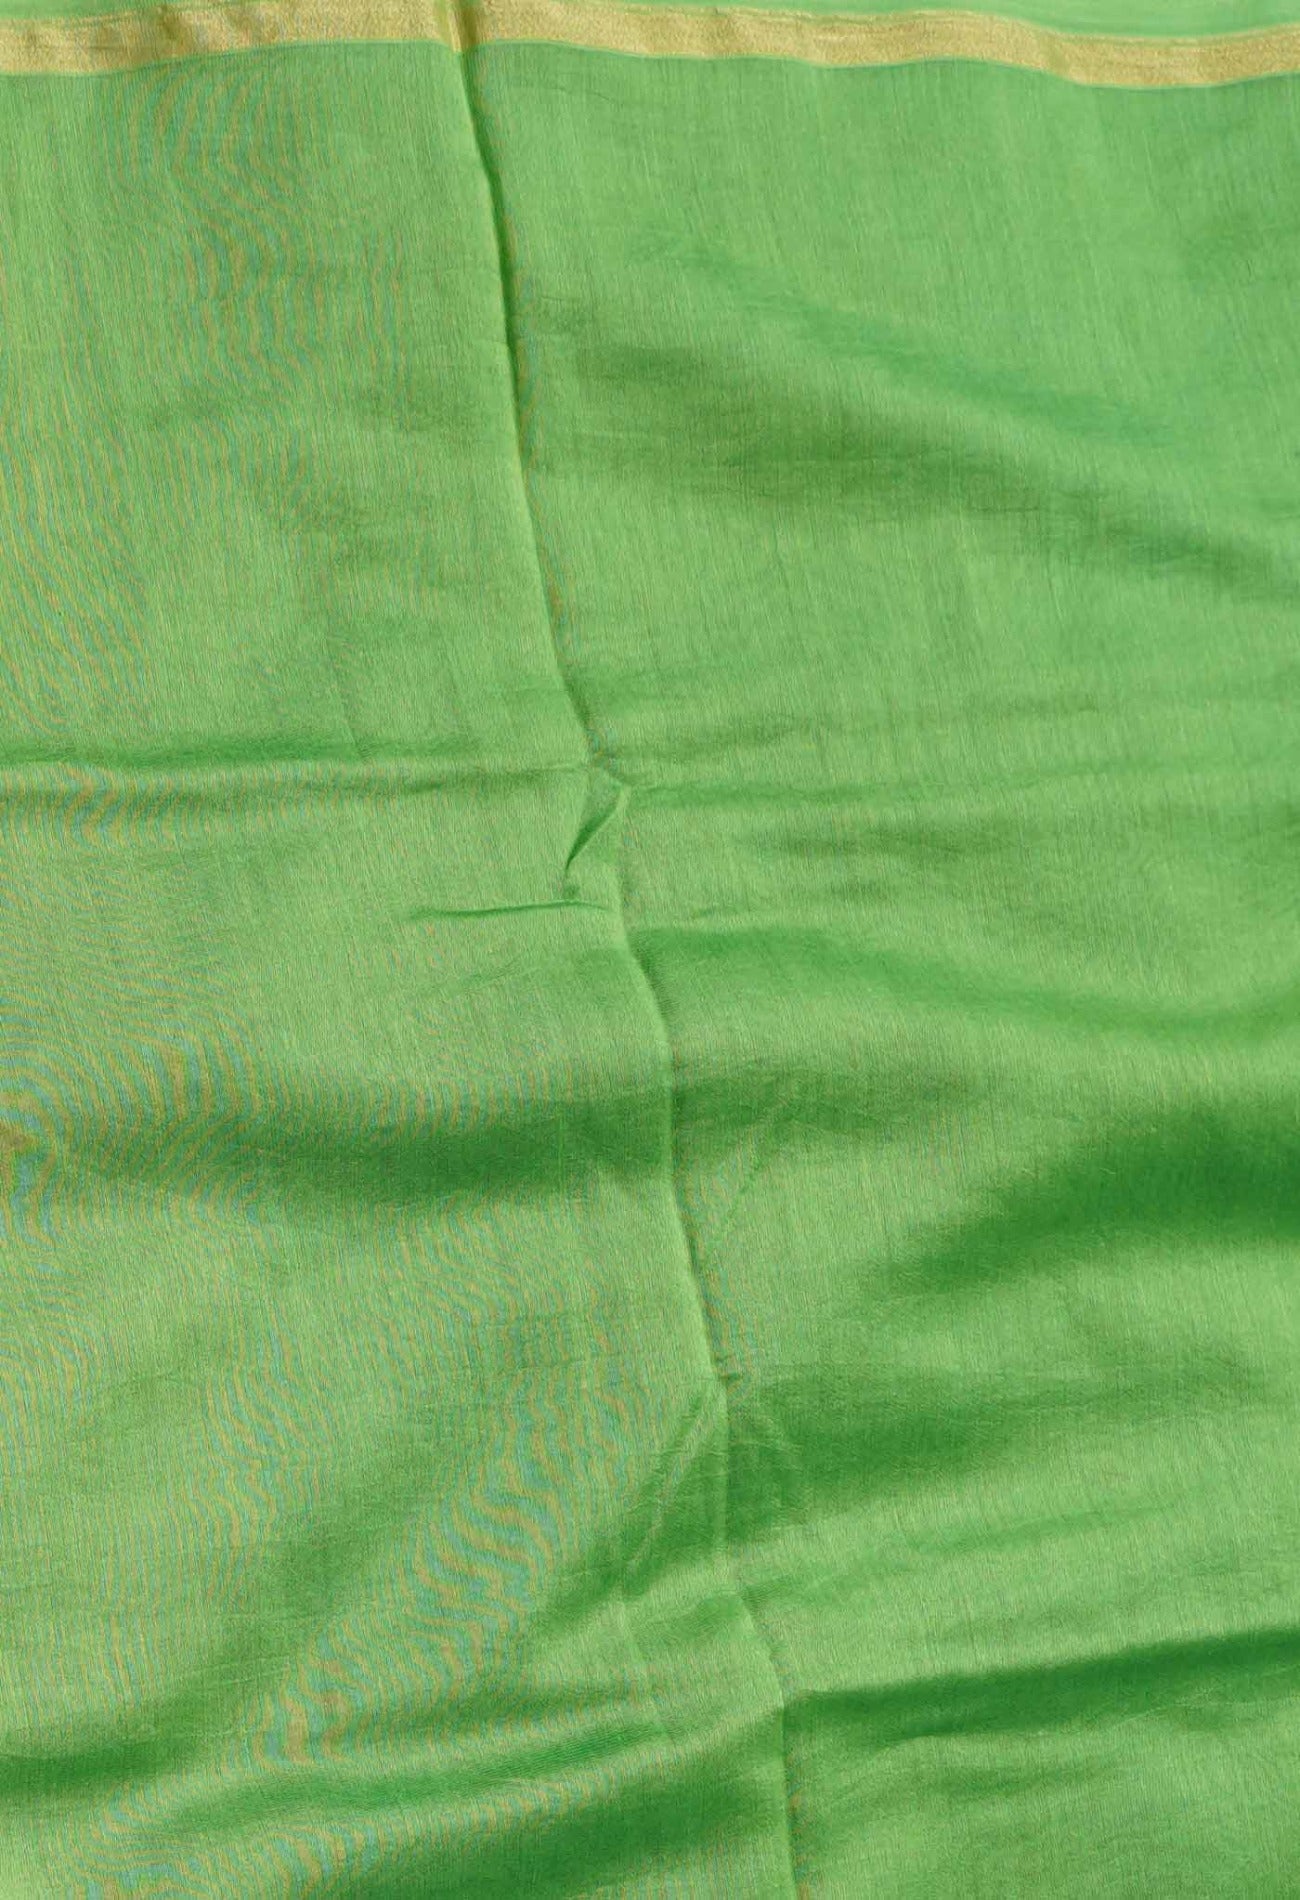 Online Shopping for Green Pure Chanderi Sico Saree with Weaving from Madhya Pradesh at Unnatisilks.com India
